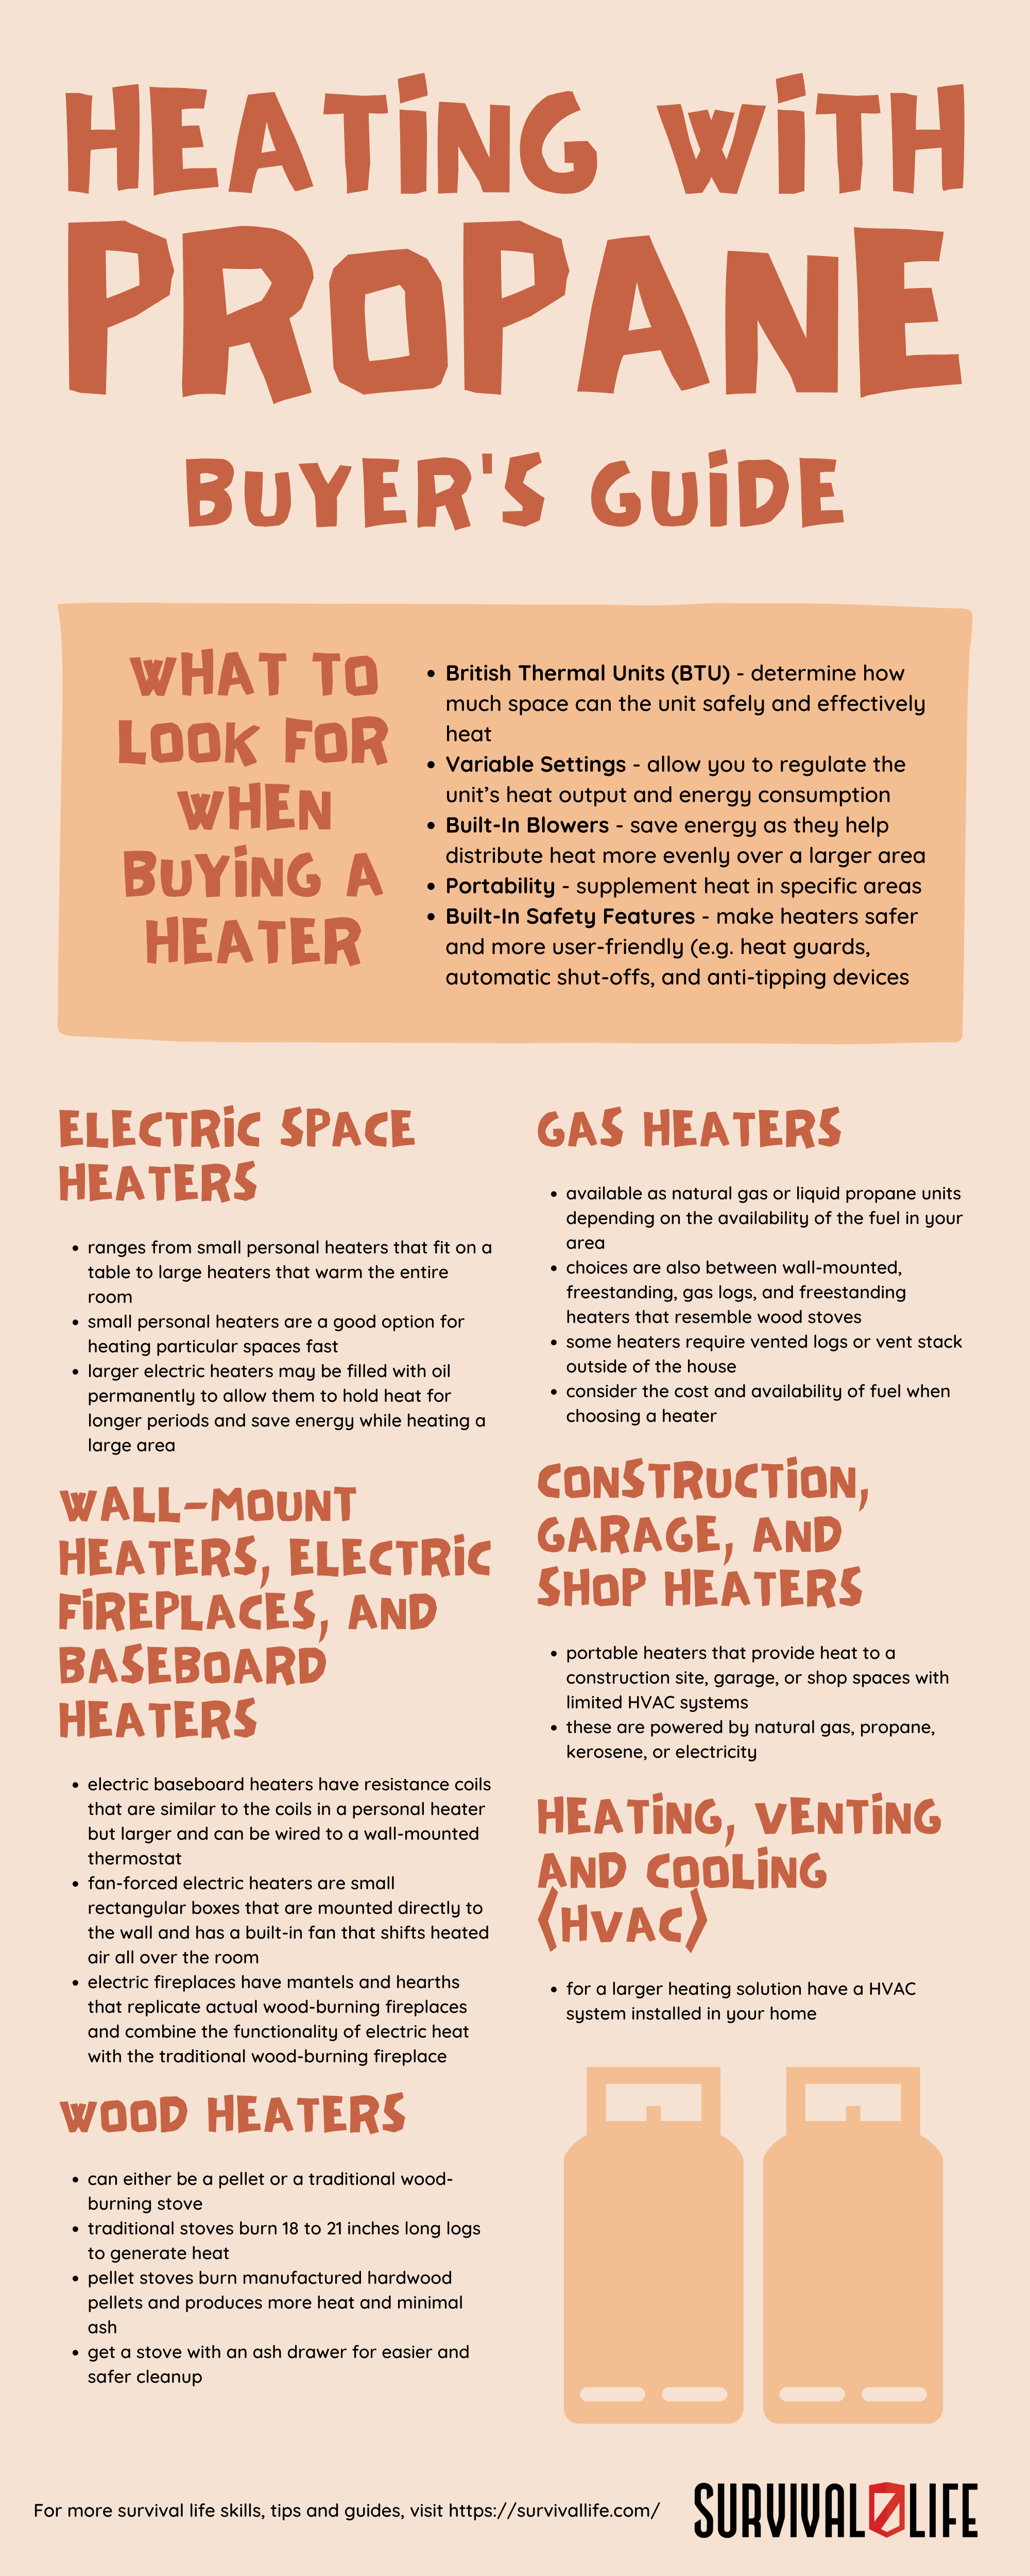 Heating With Propane Buyer's Guide